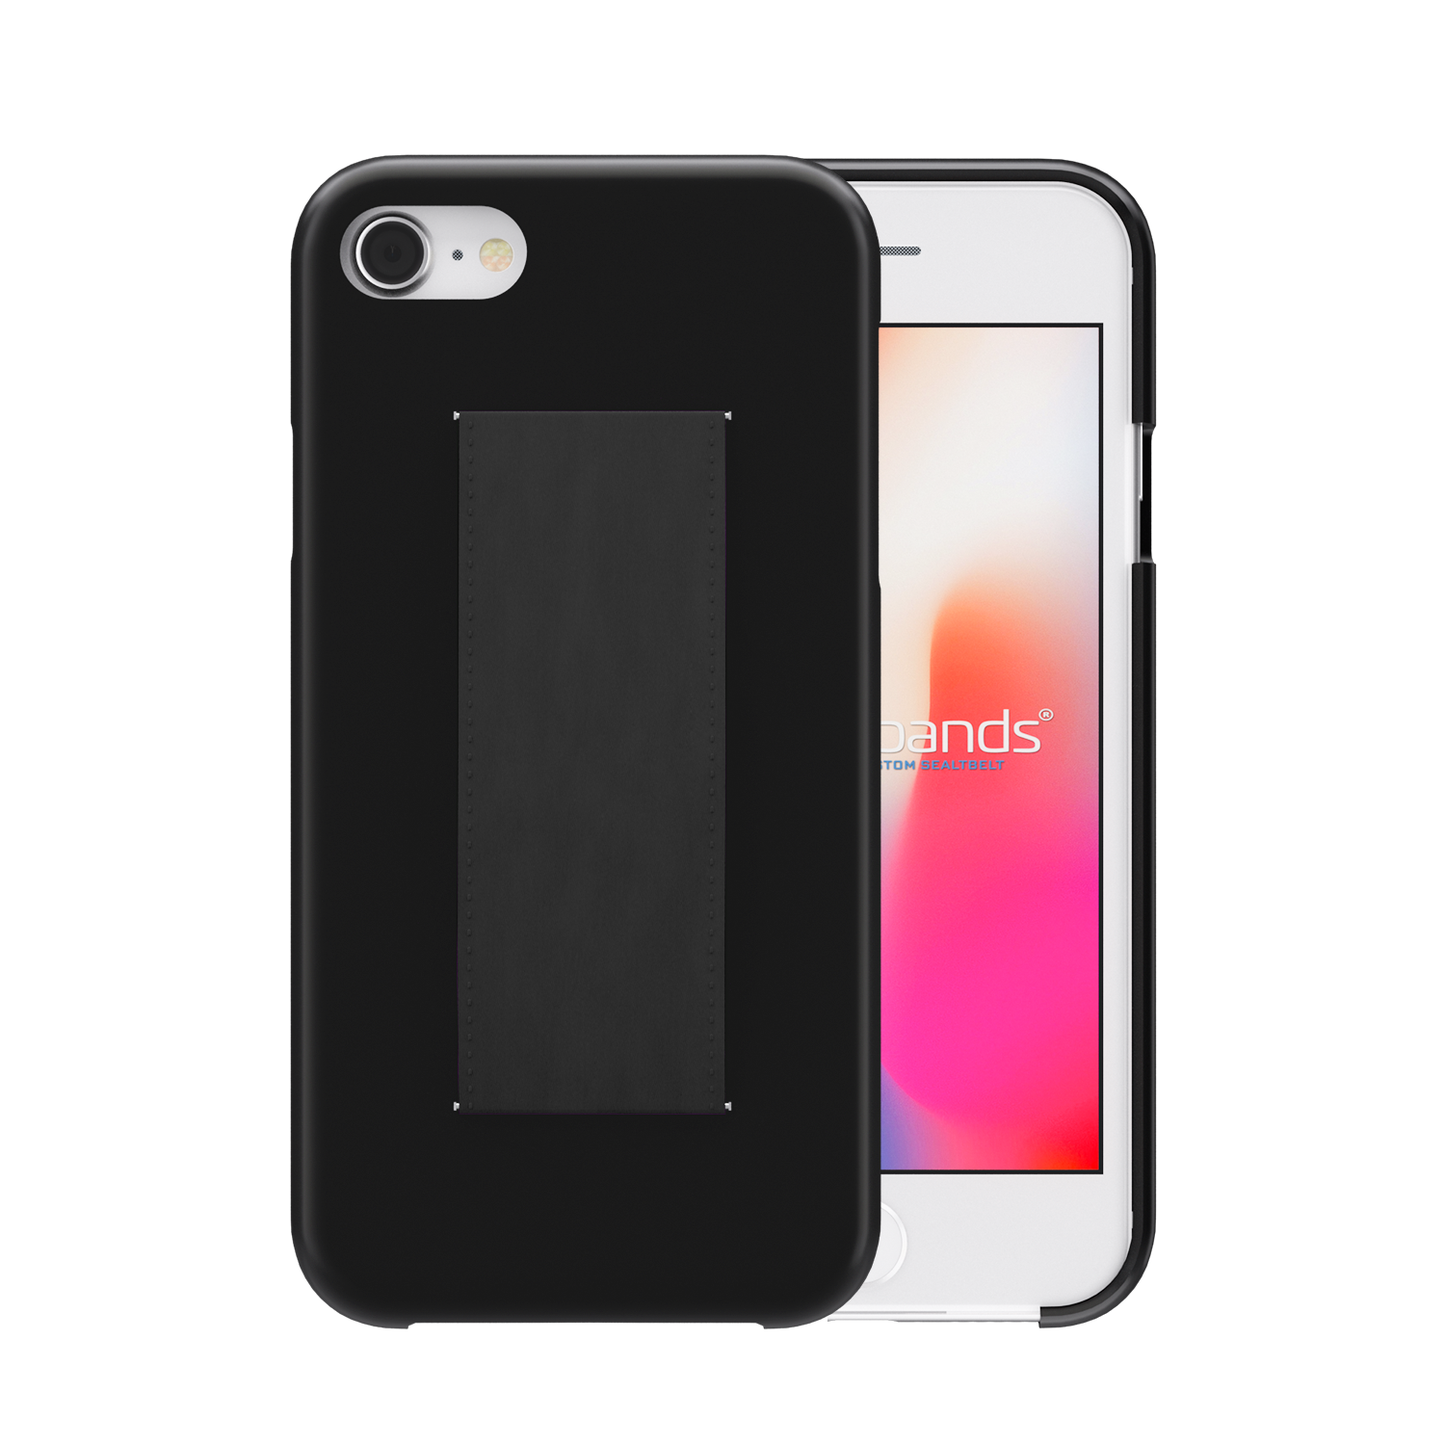 Switchbands Case & Black Band - iPhone 8 / 7 and SE 2020